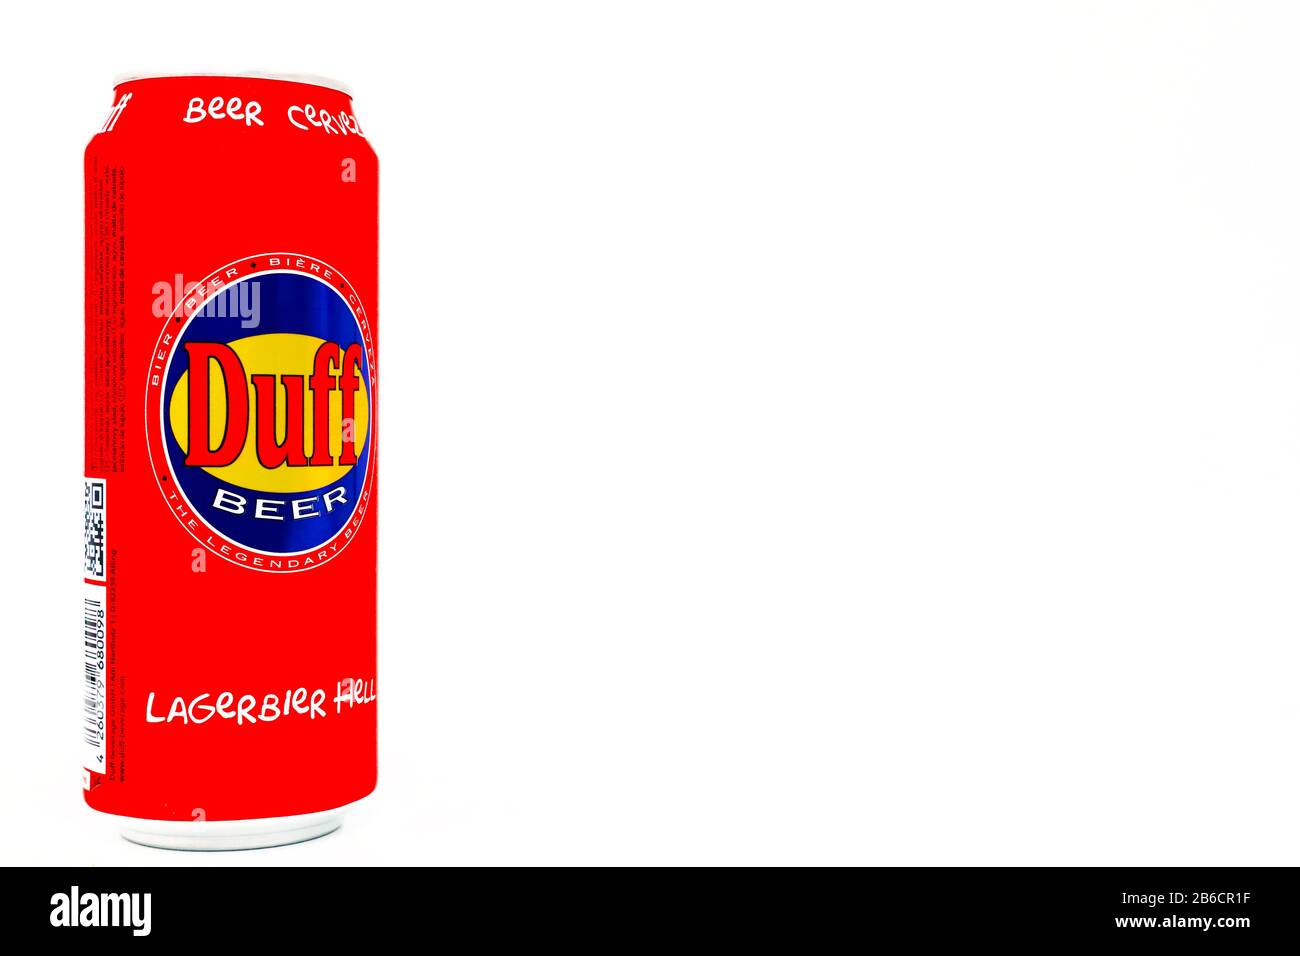 DUFF Beer, the legendary beer Duff produced Stock beverage - GmbH Alamy by Photo